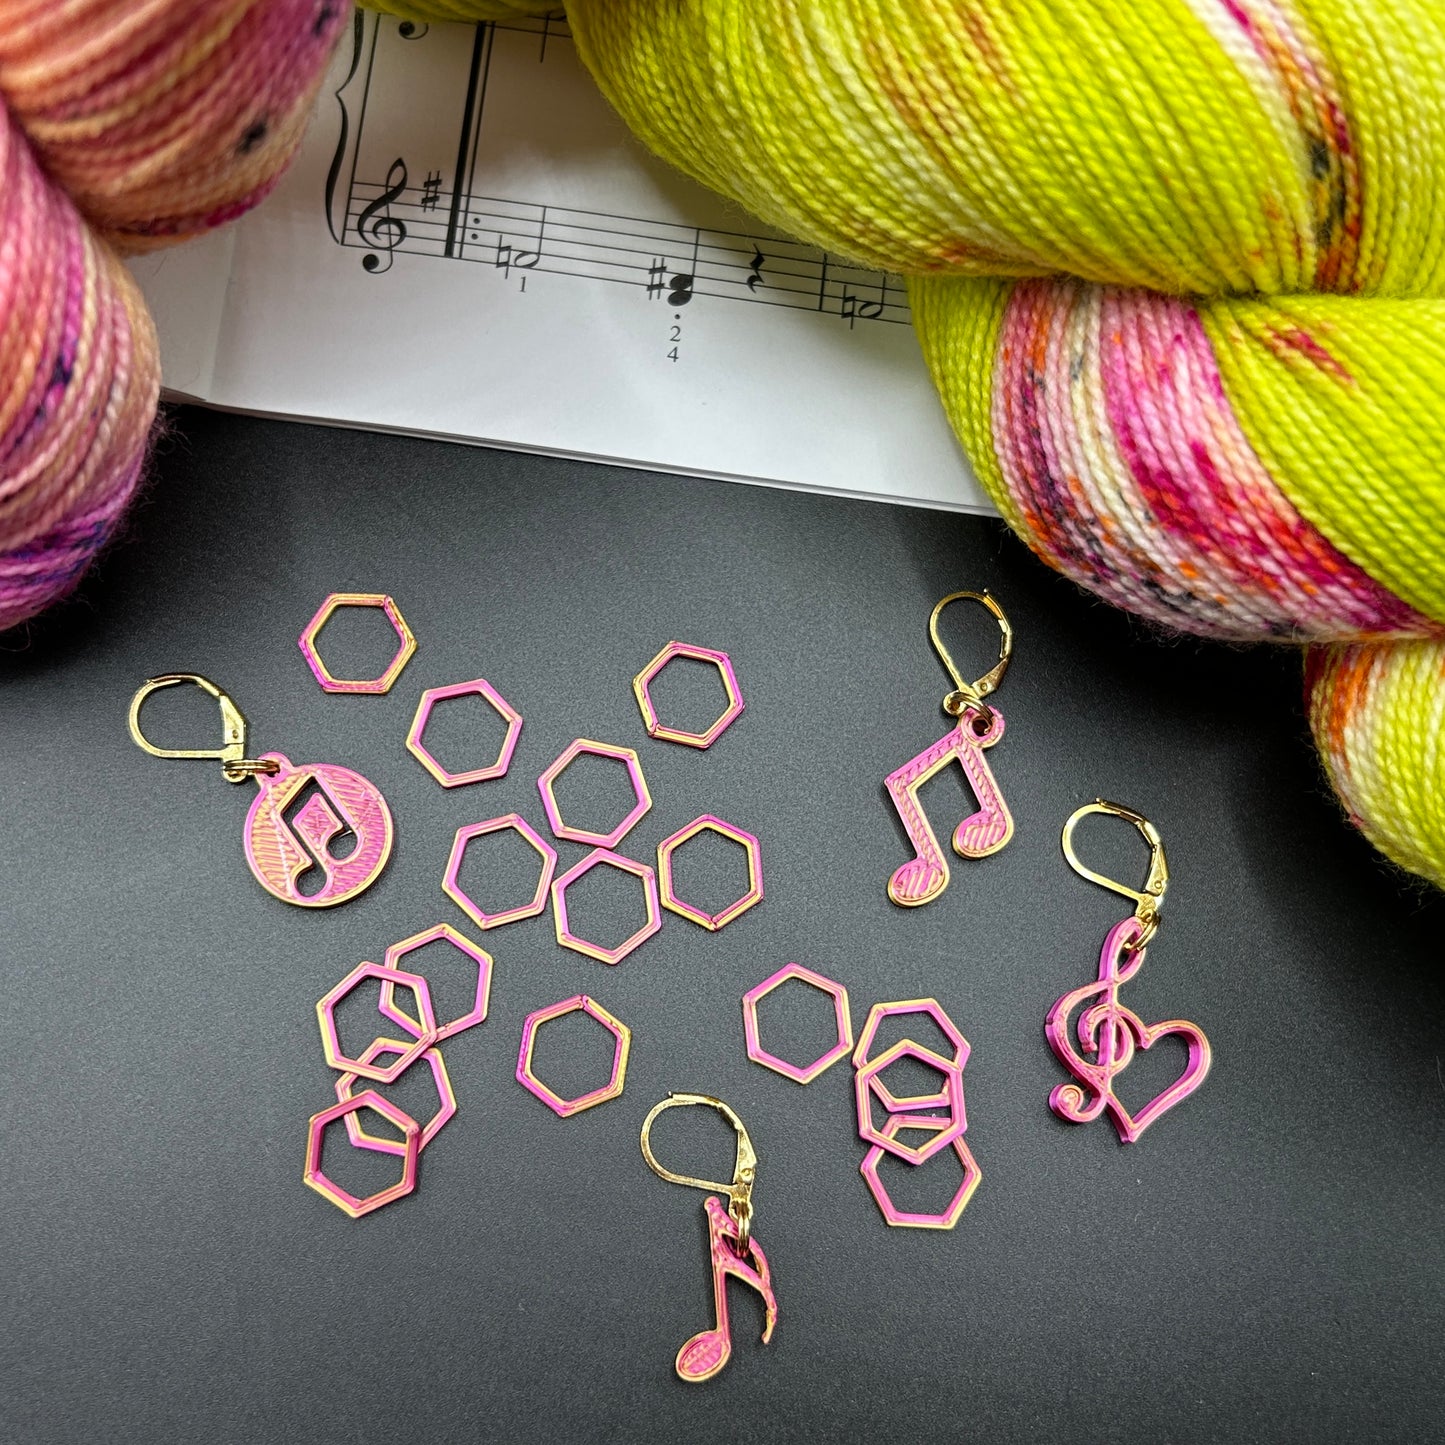 The Math behind the Music STITCH MARKERS